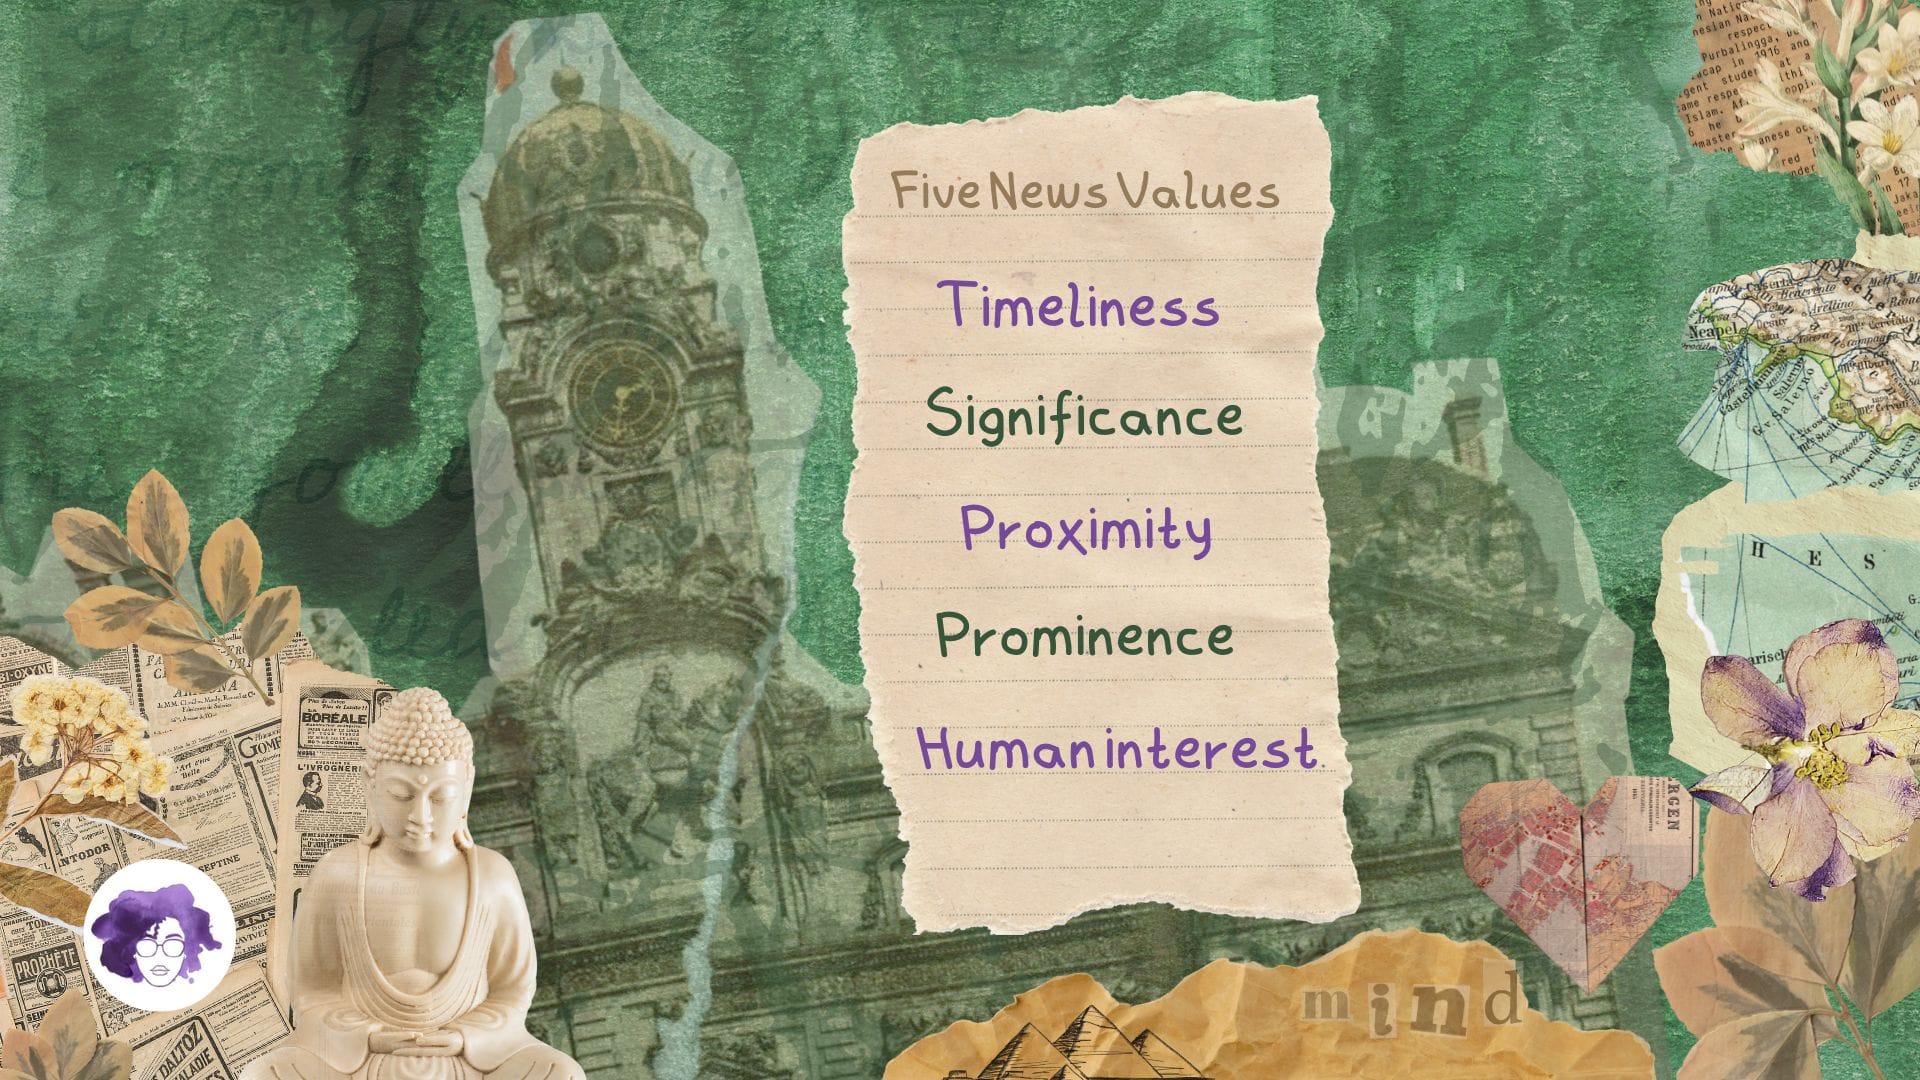 The five news values are: timeliness, significance, proximity, prominence, and human interest.